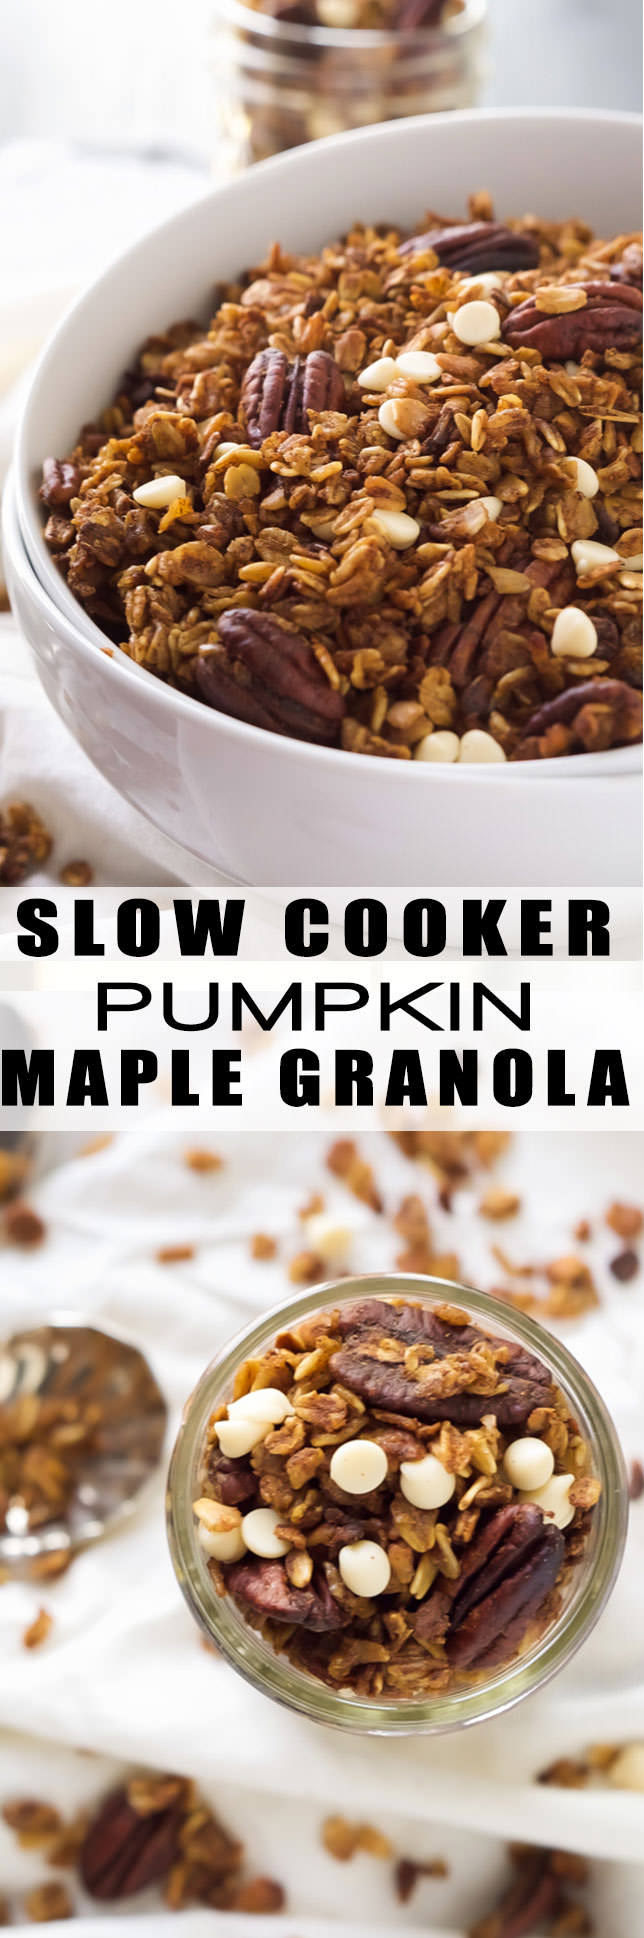 A slow cooker makes this granola so easy to make! Filled with fall flavors, this Slow Cooker Pumpkin Granola has roasted pecans, cranberries and white chocolate!